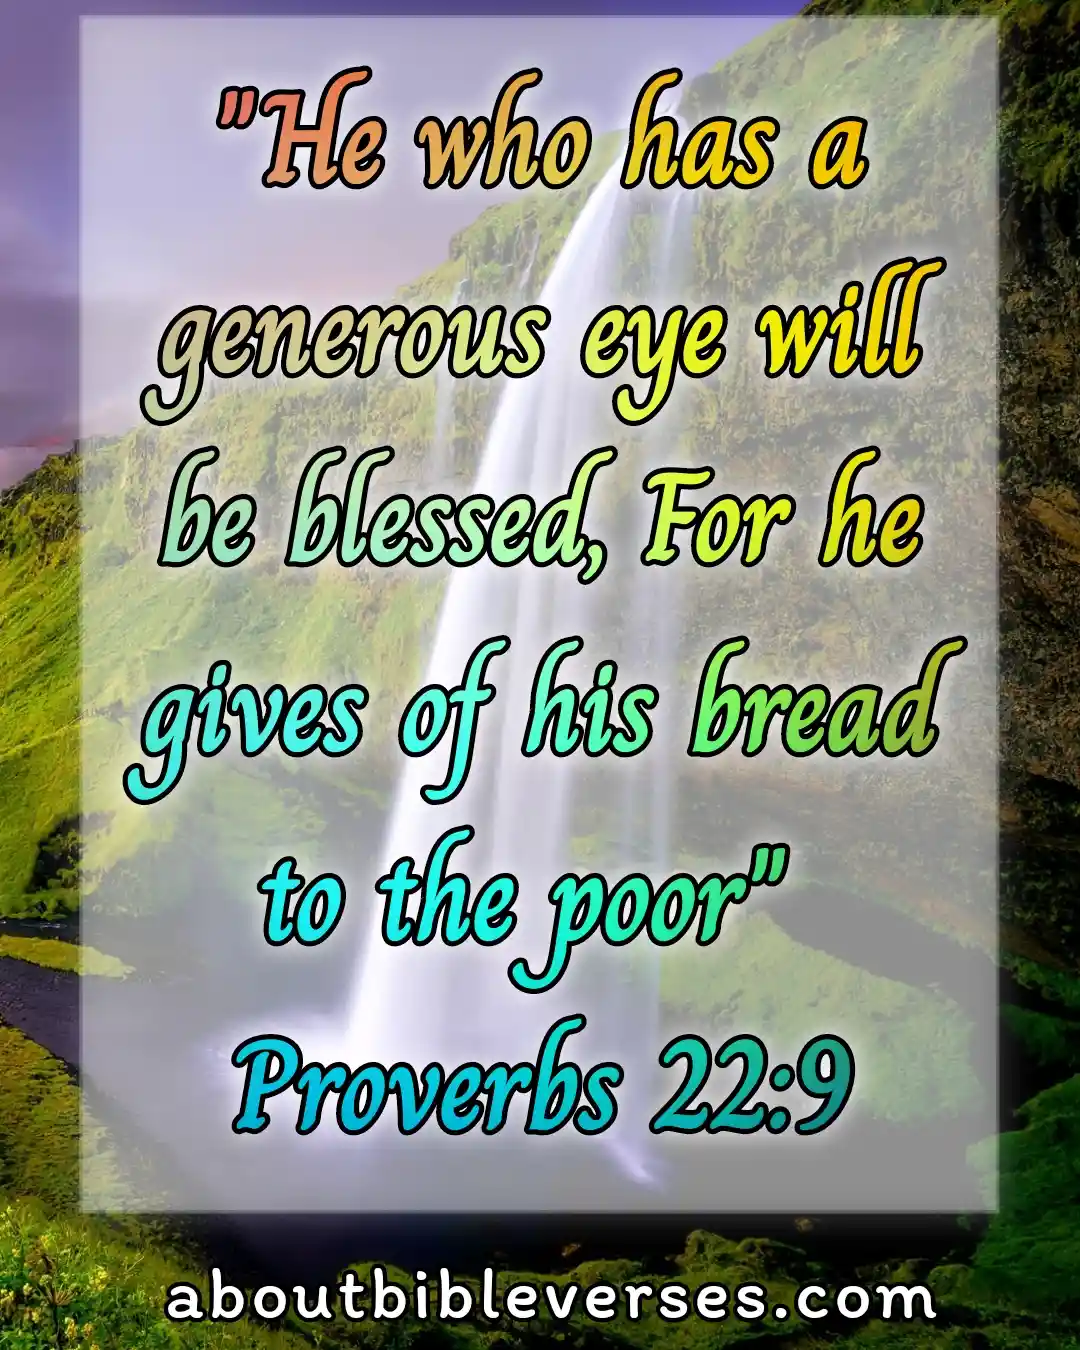 Bible Verses About Generosity (Proverbs 22:9)